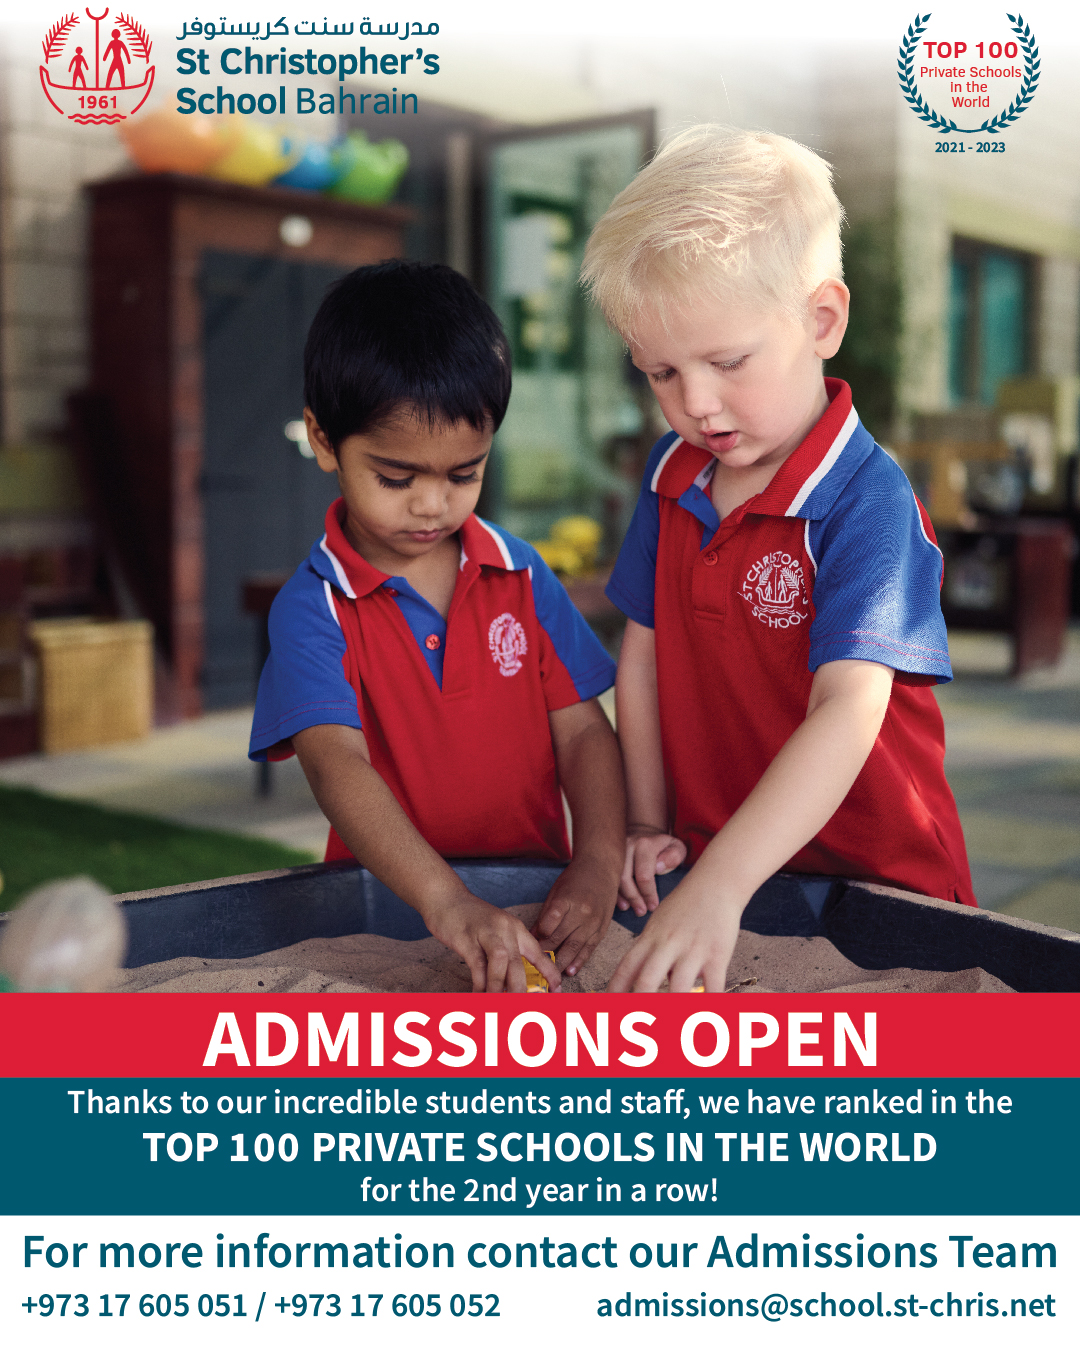 St Christopher's School Bahrain Admissions Open 